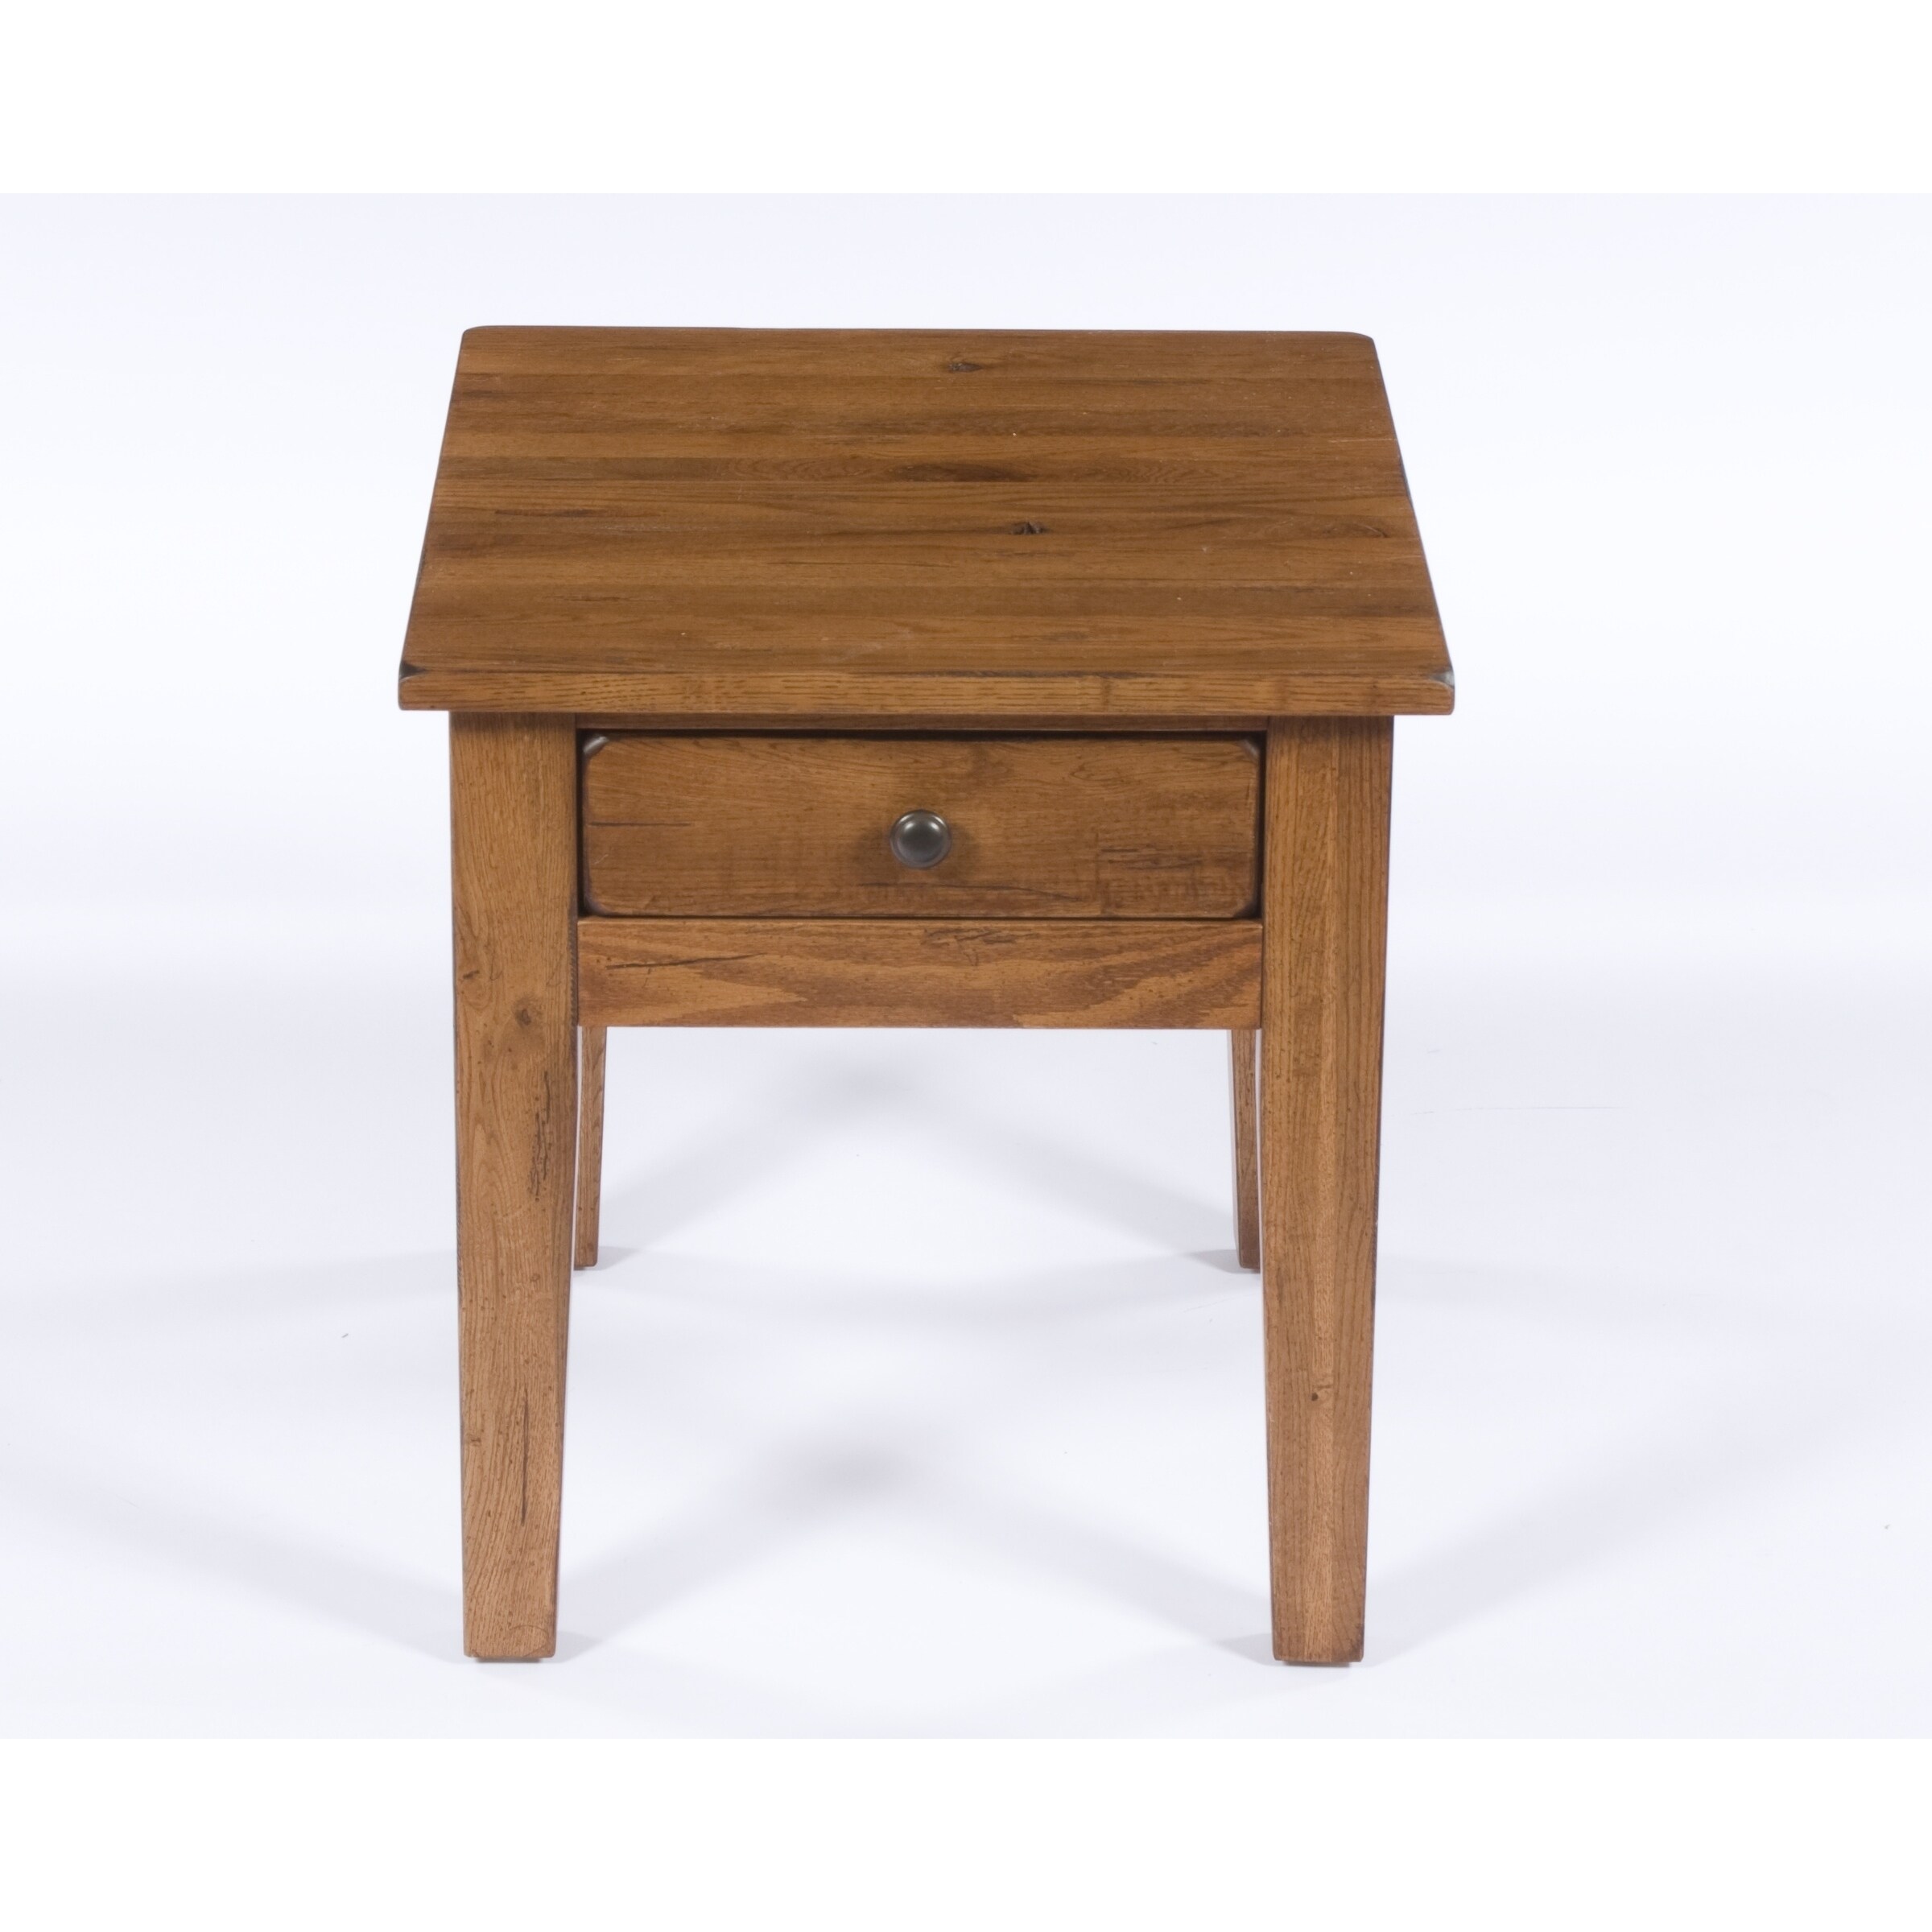 Shop Broyhill Attic Heirlooms End Table Overstock 21621493